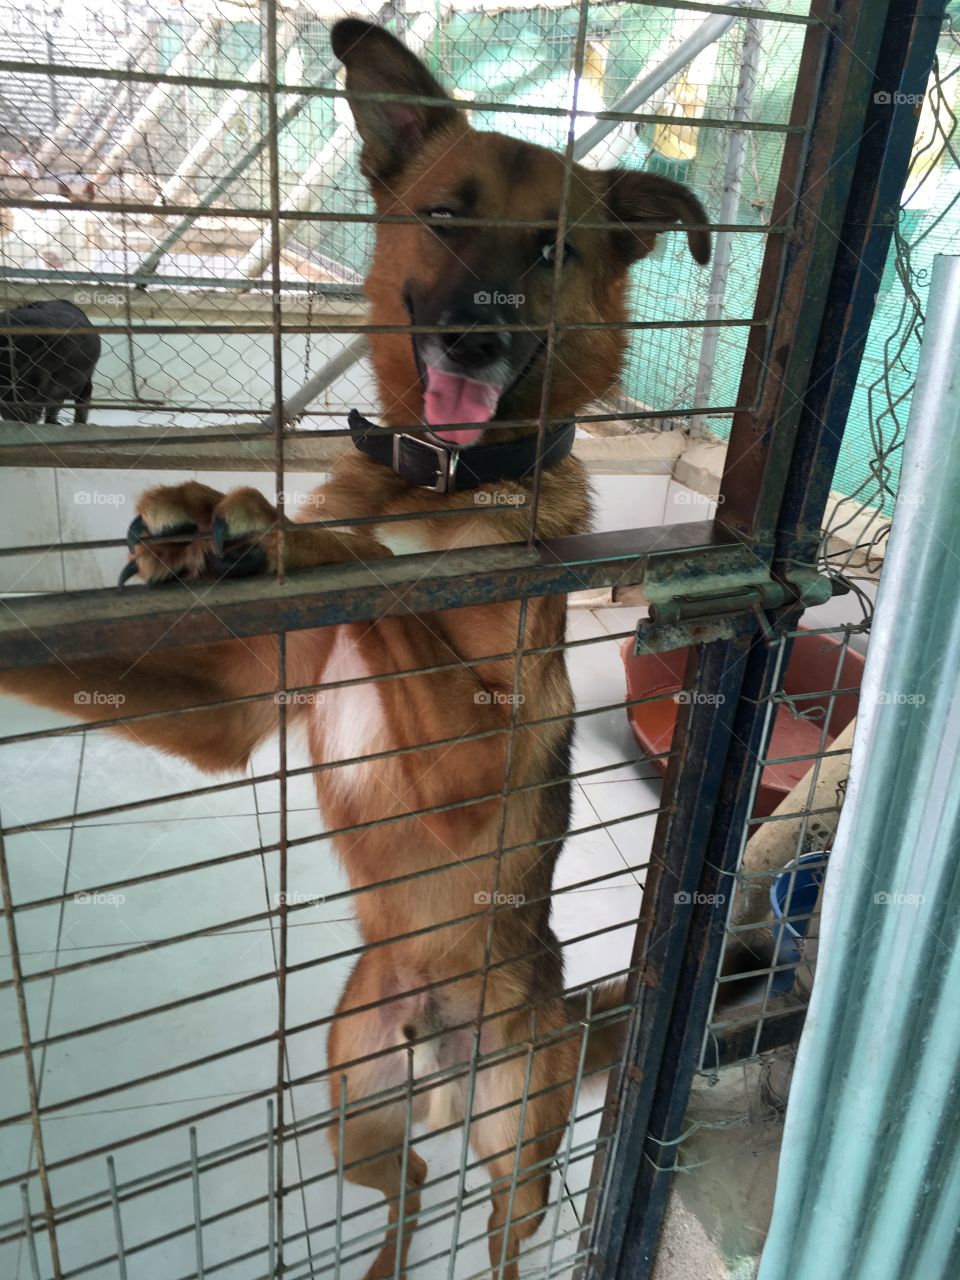 A picture of a German shepherd up for adoption, standing on his hind legs in his kennel 